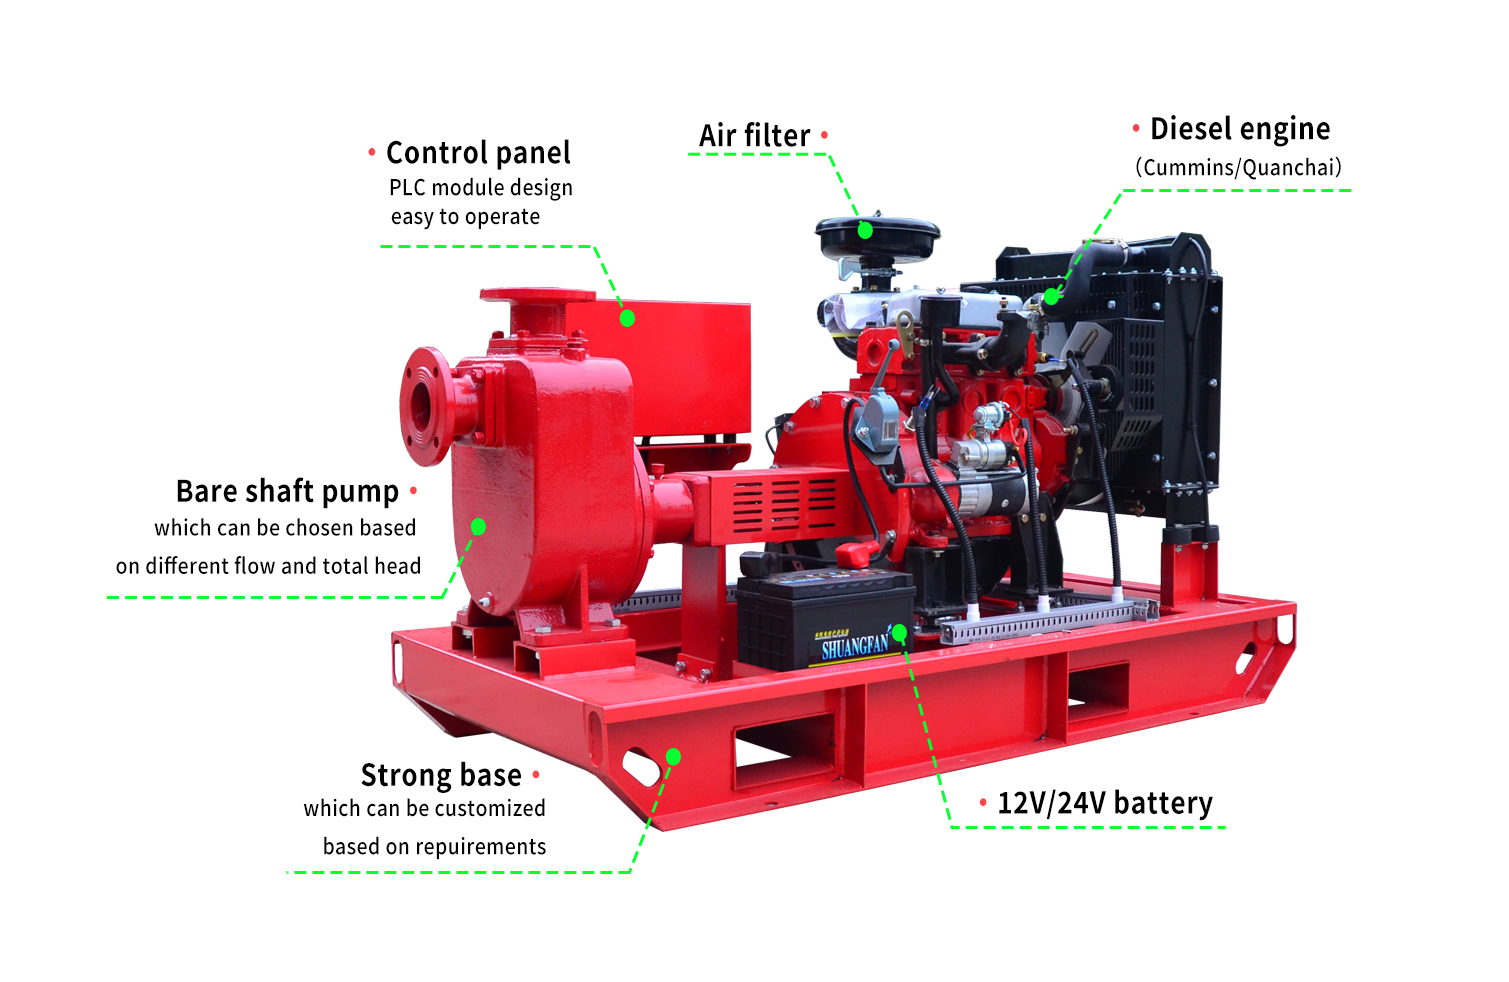 Powerful XBC-ZWC Diesel Engine Pumps for Superior Fire Control